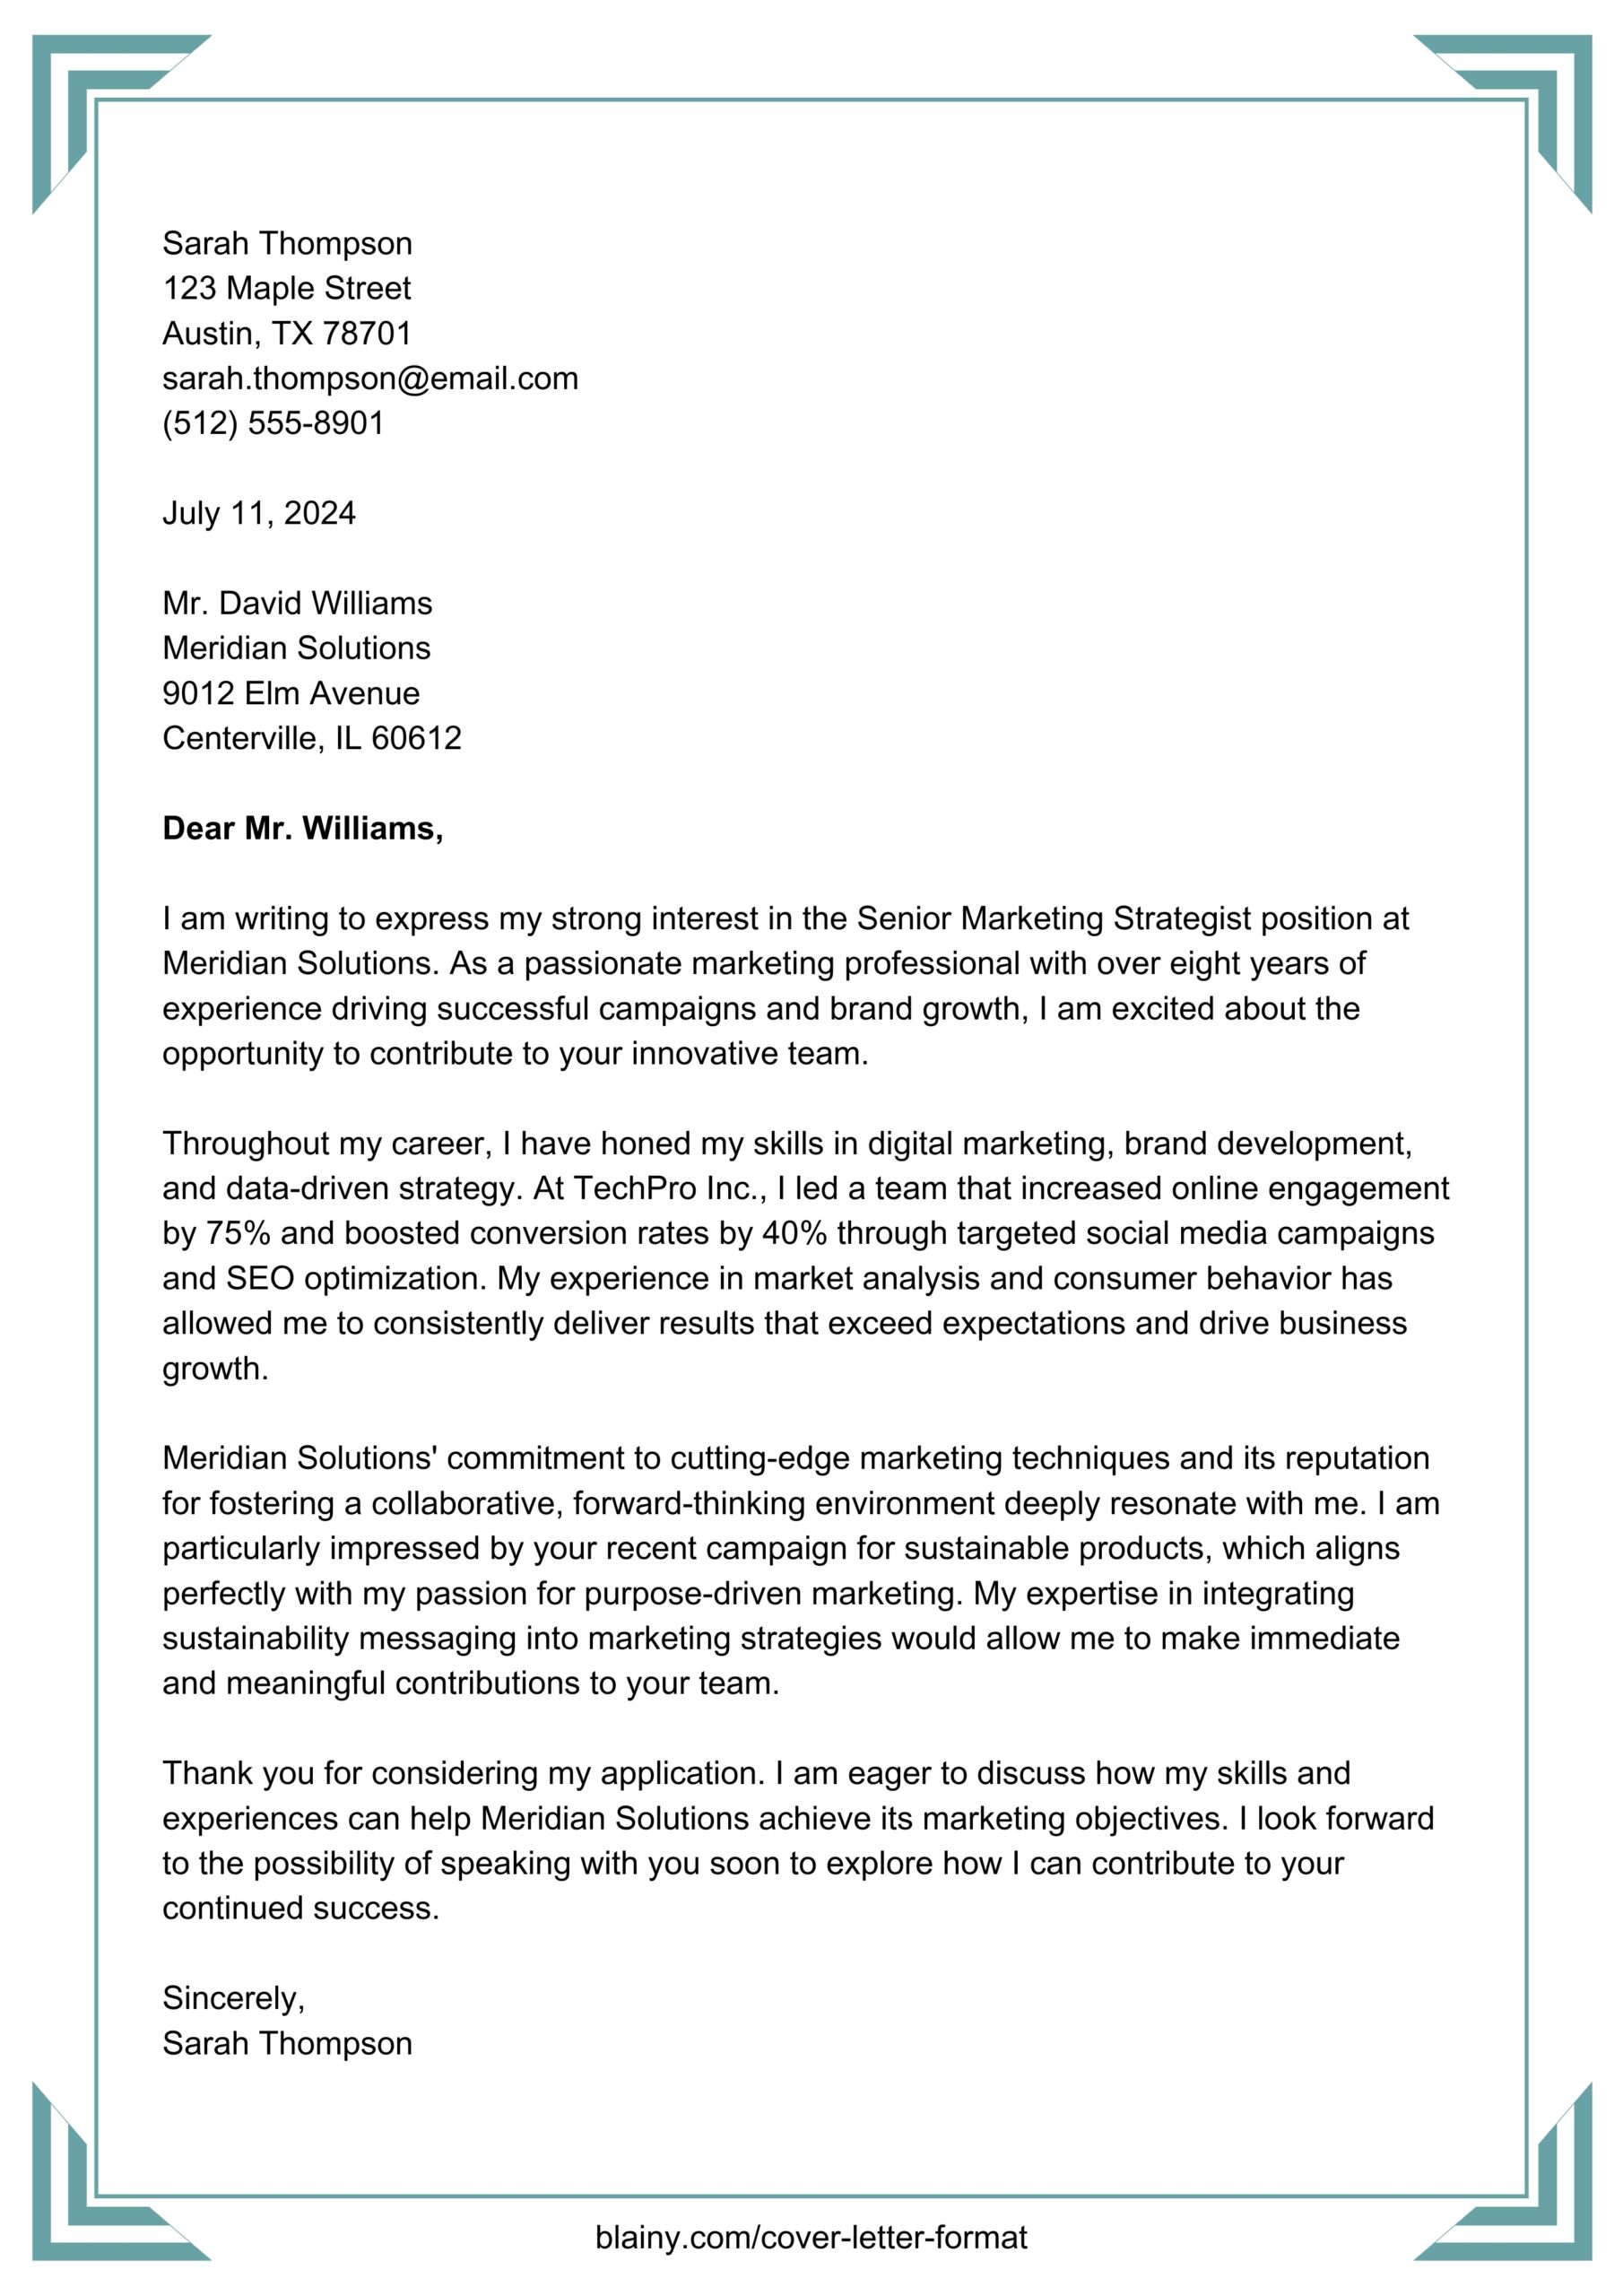 Example cover letter

Sarah Thompson
123 Maple Street
Austin, TX 78701
sarah.thompson@email.com
(512) 555-8901

July 11, 2024

Mr. David Williams
Meridian Solutions
9012 Elm Avenue
Centerville, IL 60612

Dear Mr. Williams,

I am writing to express my strong interest in the Senior Marketing Strategist position at Meridian Solutions. As a passionate marketing professional with over eight years of experience driving successful campaigns and brand growth, I am excited about the opportunity to contribute to your innovative team.

Throughout my career, I have honed my skills in digital marketing, brand development, and data-driven strategy. At TechPro Inc., I led a team that increased online engagement by 75% and boosted conversion rates by 40% through targeted social media campaigns and SEO optimization. My experience in market analysis and consumer behavior has allowed me to consistently deliver results that exceed expectations and drive business growth.

Meridian Solutions' commitment to cutting-edge marketing techniques and its reputation for fostering a collaborative, forward-thinking environment deeply resonate with me. I am particularly impressed by your recent campaign for sustainable products, which aligns perfectly with my passion for purpose-driven marketing. My expertise in integrating sustainability messaging into marketing strategies would allow me to make immediate and meaningful contributions to your team.

Thank you for considering my application. I am eager to discuss how my skills and experiences can help Meridian Solutions achieve its marketing objectives. I look forward to the possibility of speaking with you soon to explore how I can contribute to your continued success.

Sincerely,
Sarah Thompson